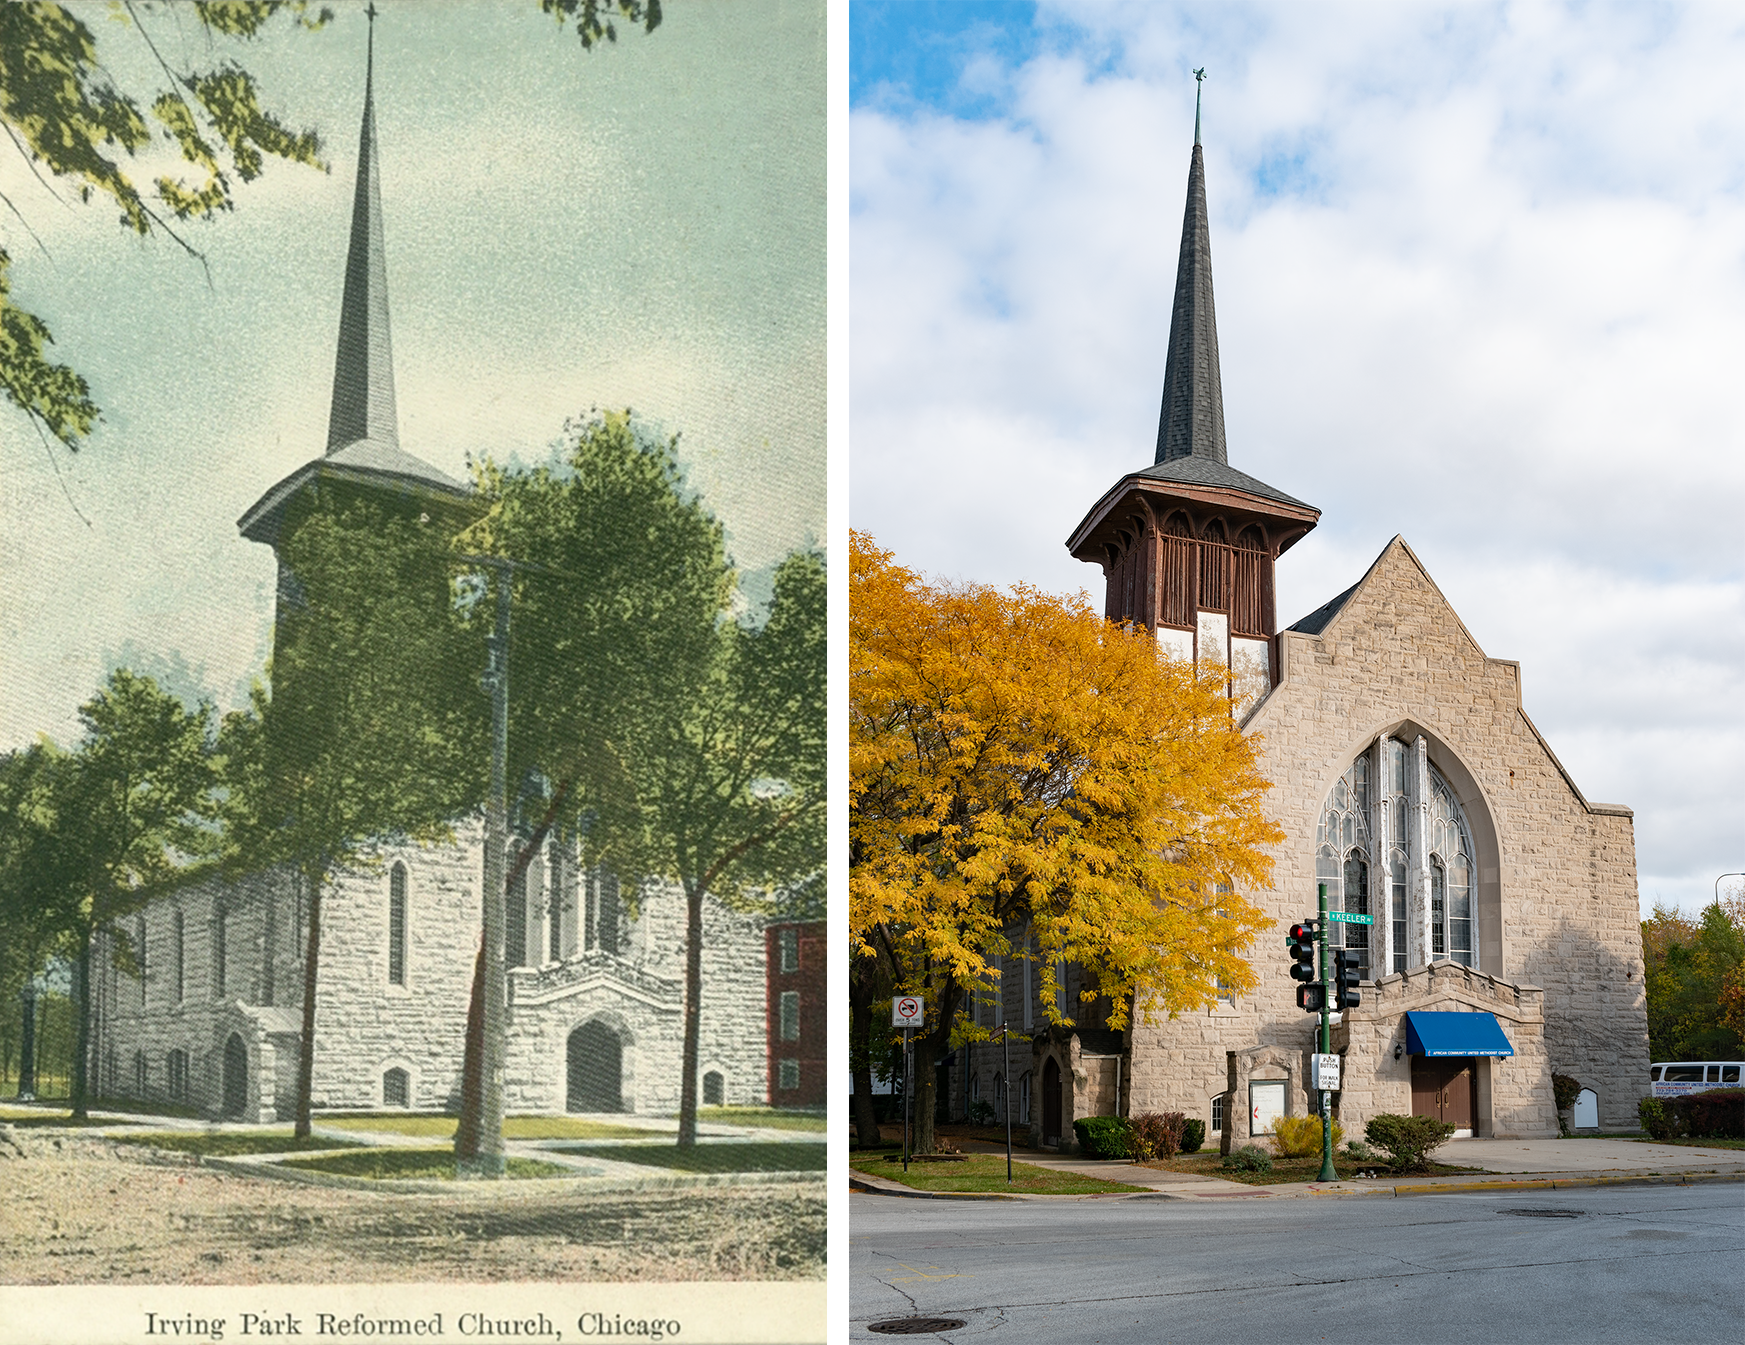 Postcard on the left: green trees, stone church, big wooden telephone pole. Photo on the right: yellowish fall leaves, stone church.